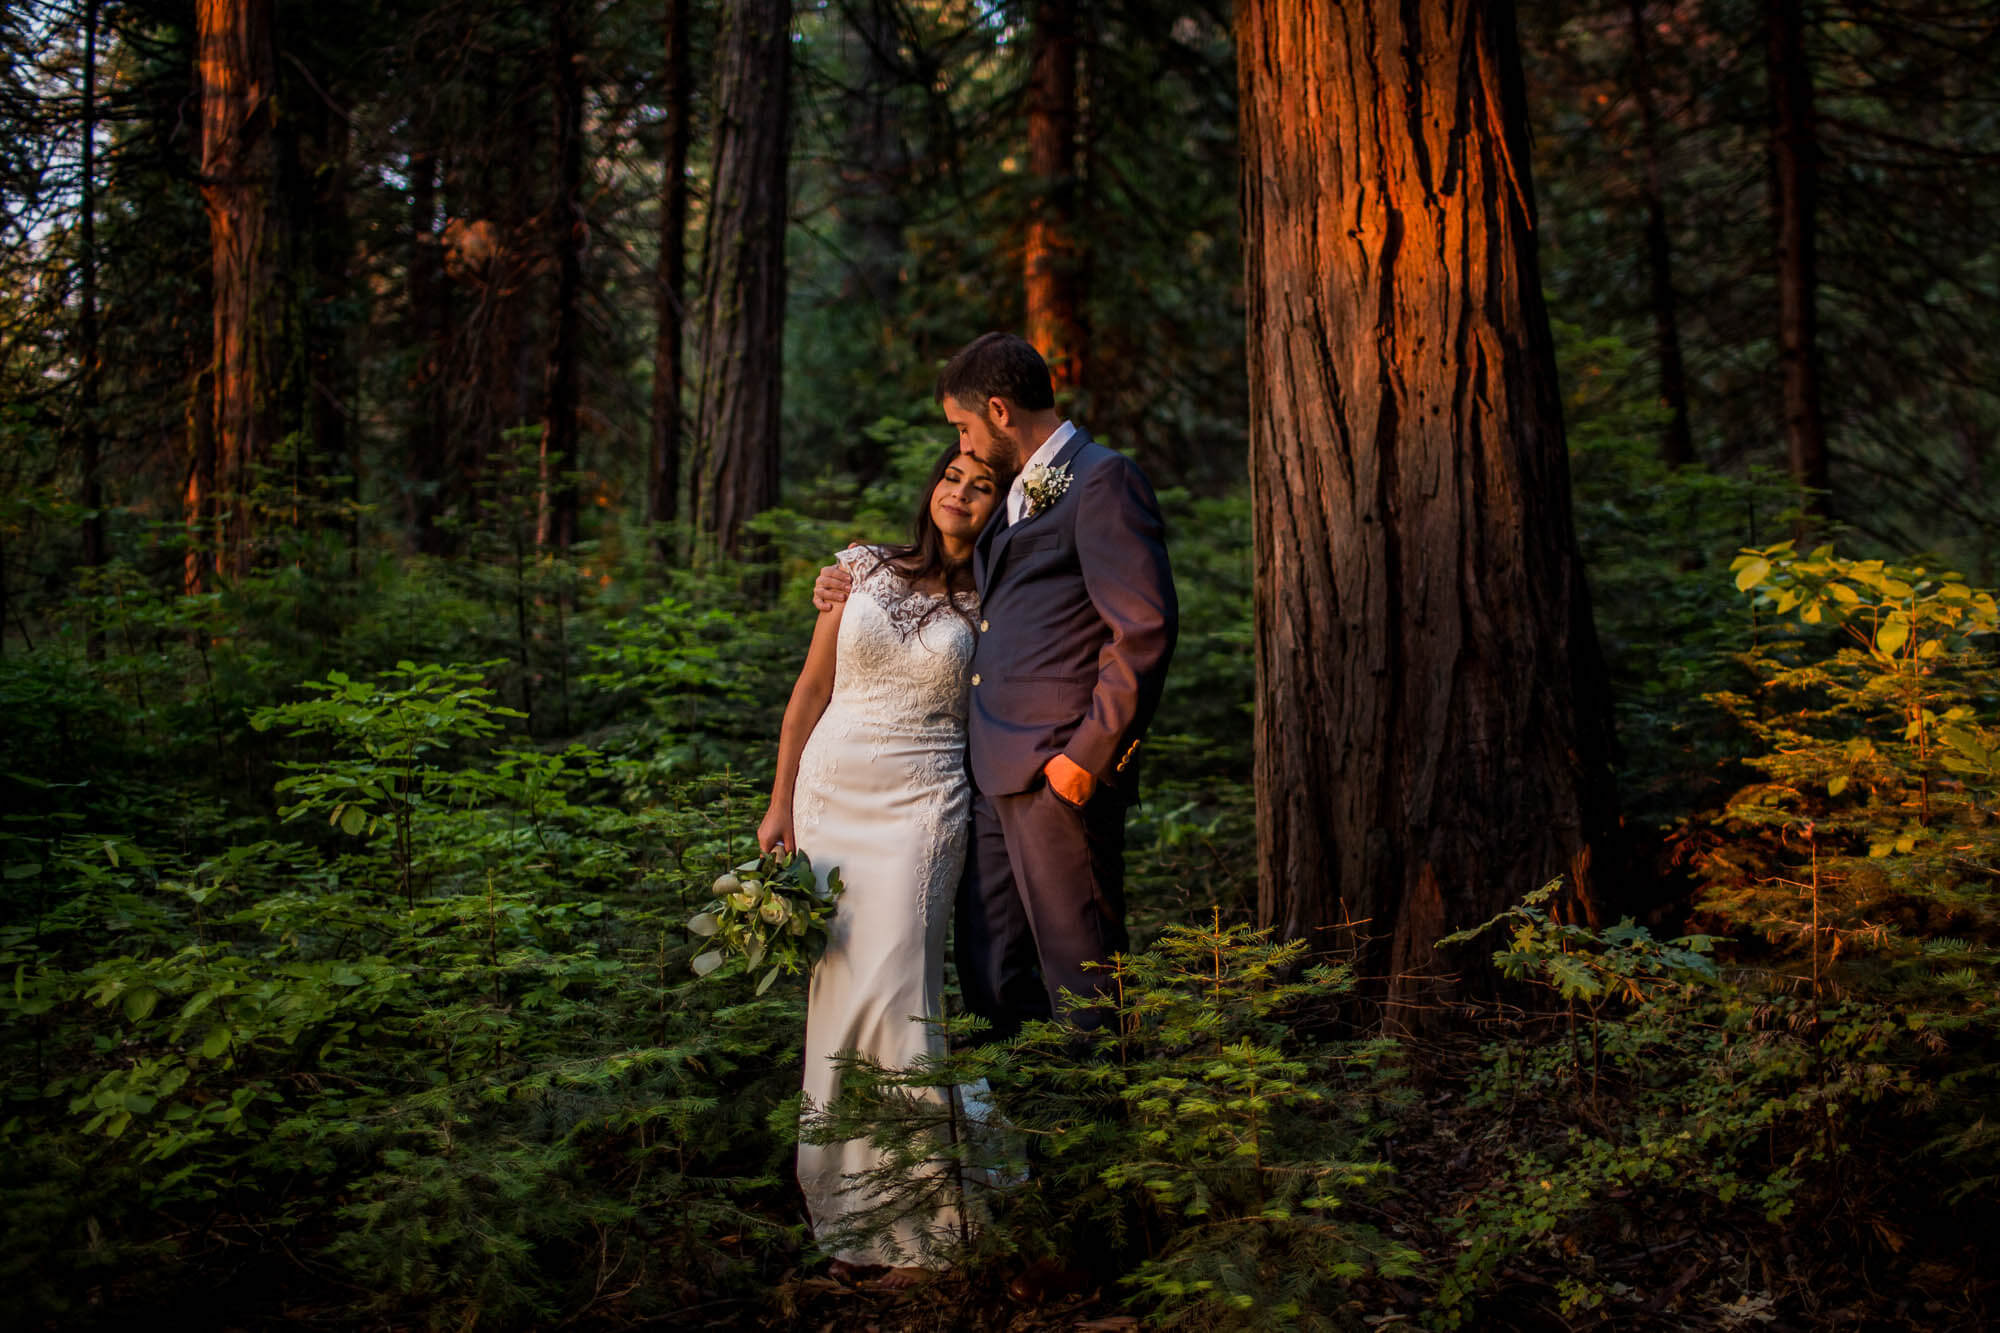 Portrait of bride and groom in a forest